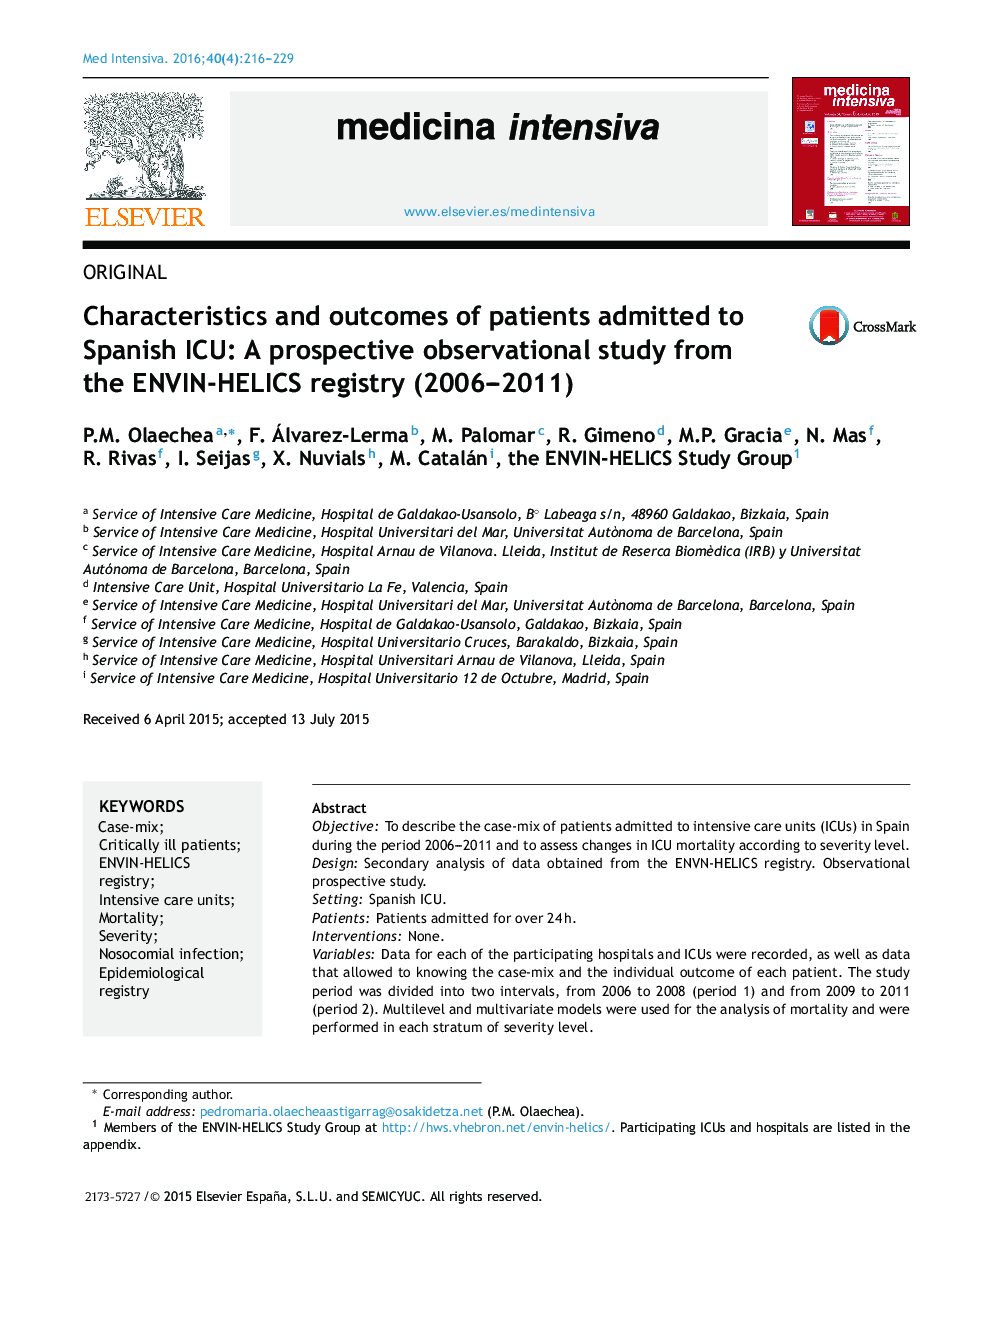 Characteristics and outcomes of patients admitted to Spanish ICU: A prospective observational study from the ENVIN-HELICS registry (2006–2011)